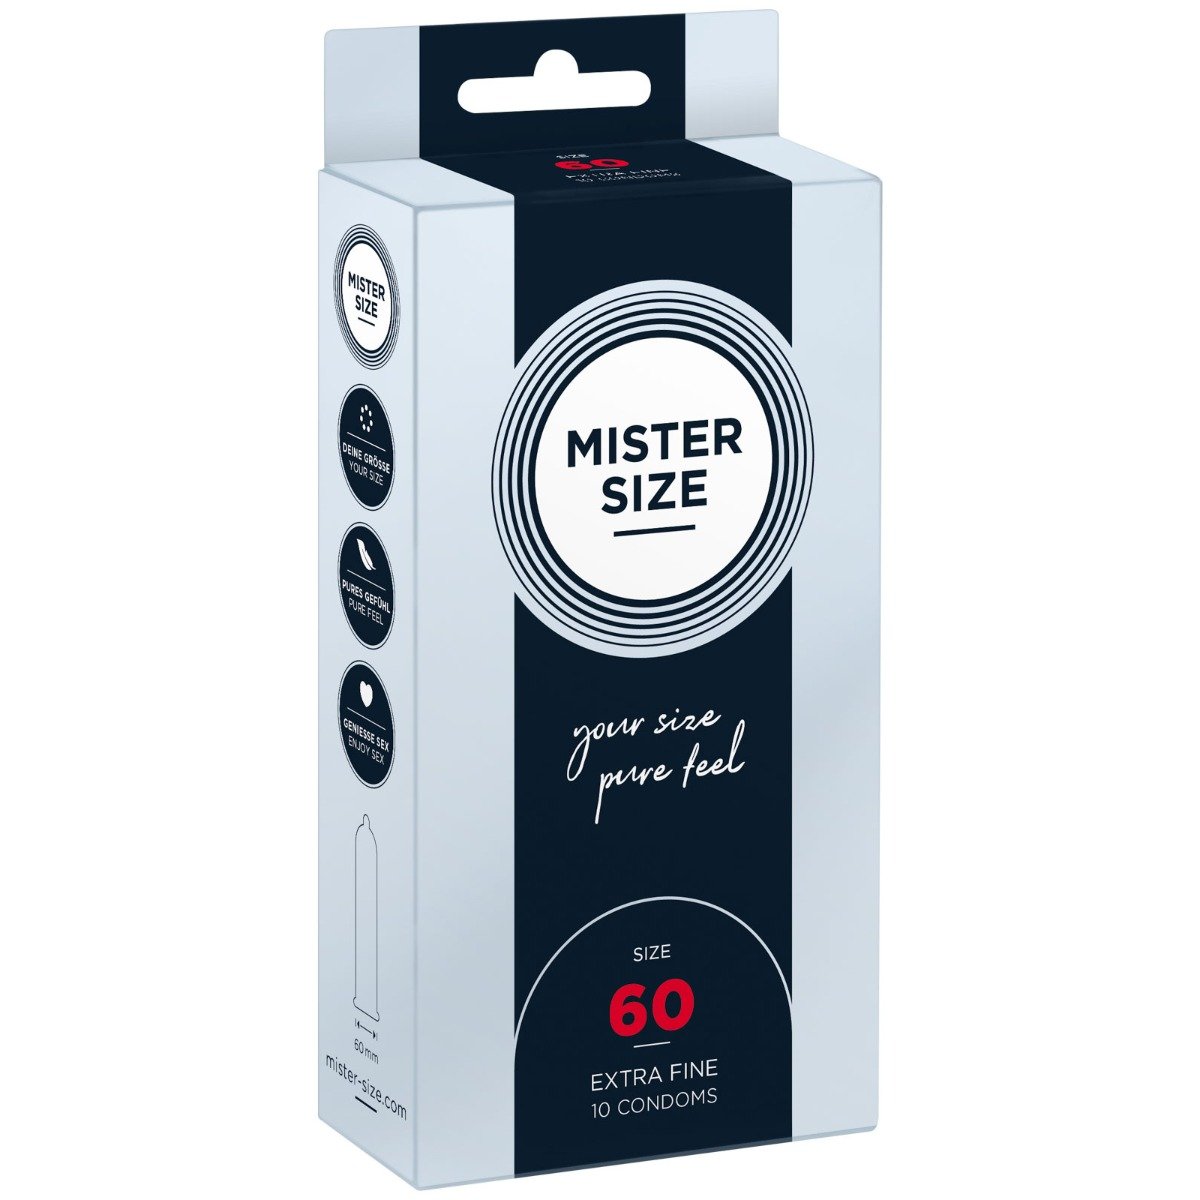 MISTER SIZE - pure feel Condoms - Size 60 mm (10 pack)